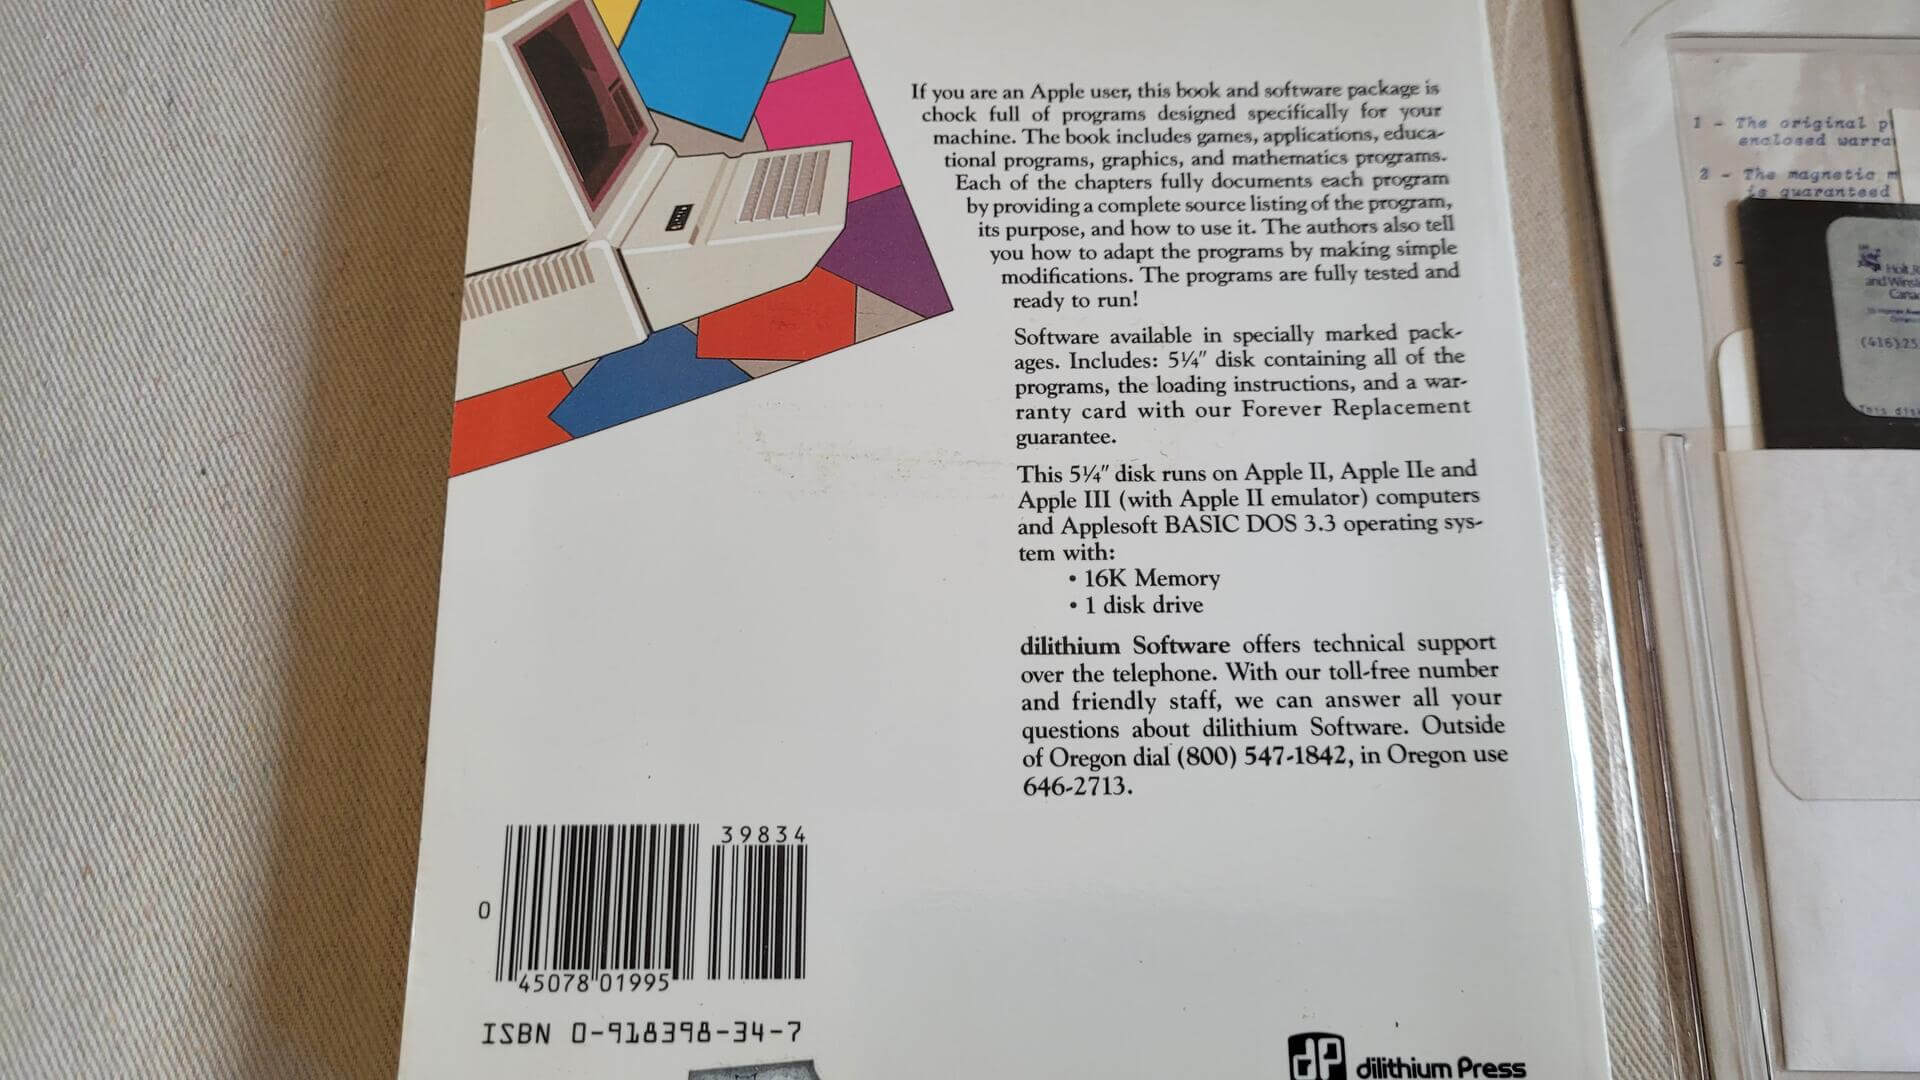 32 Basic programs for the Apple Computer, 1982 book by Tom Rugg and Phil Feldman and published by Dilithium Press. Rare vintage computer book with the sealed 5 1/4" disk that runs on Apple II, Apple IIe and Apple III computers and Applesoft Basic DOS 3.3 operating system